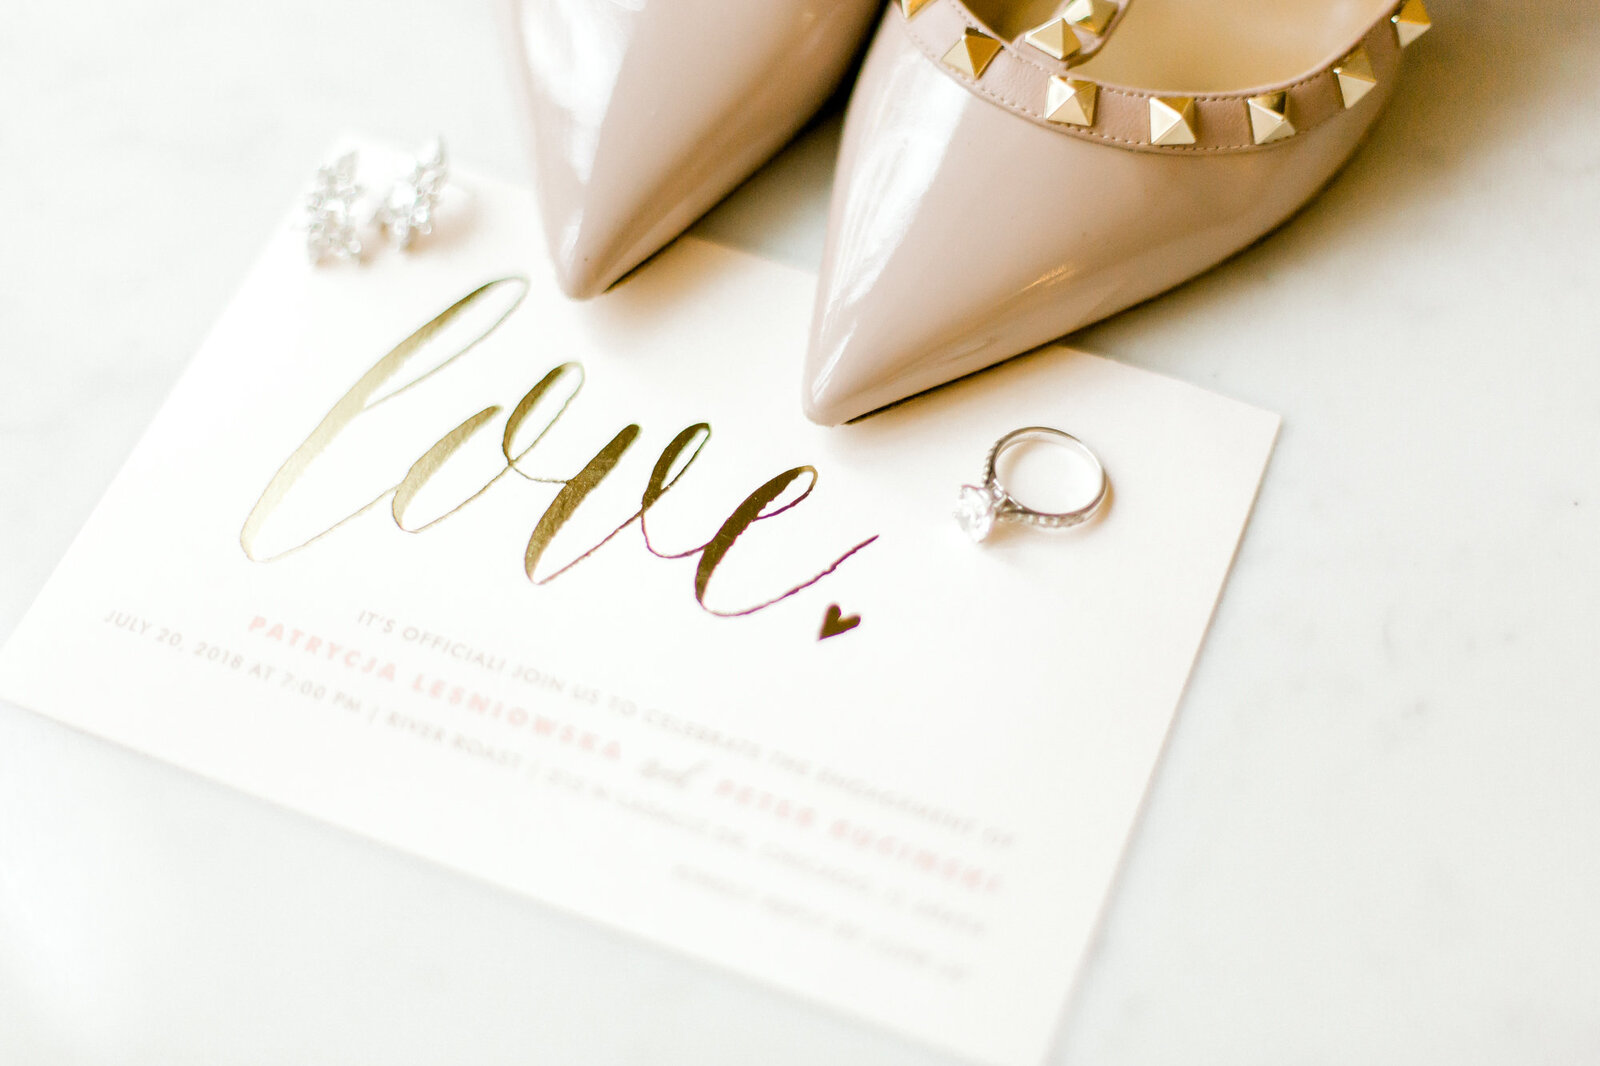 shoes and invitations